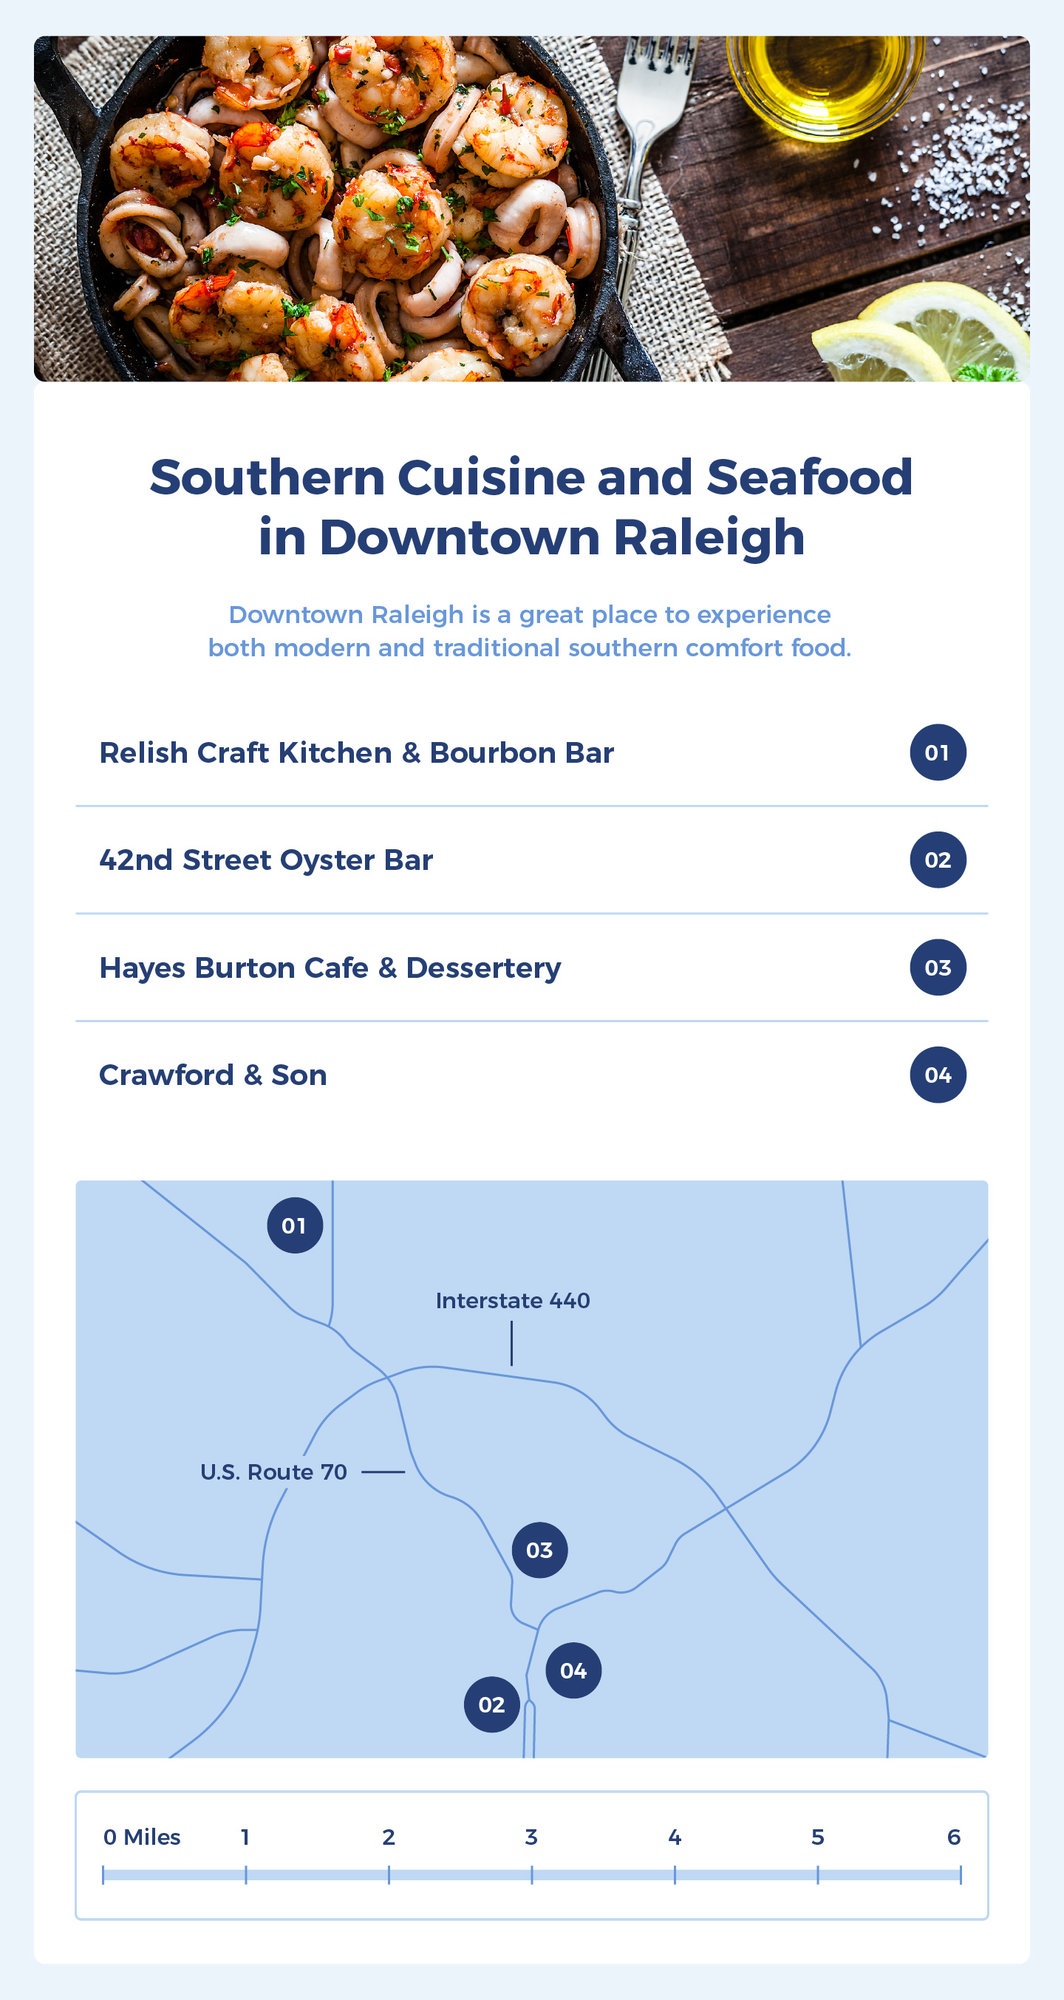 Southern and seafood restaurants in Downtown Raleigh are Relish Craft Kitchen & Bourbon Bar, 42nd Street Oyster Bar, Hayes Burton Cafe & Dessertery, and Crawford & Son.